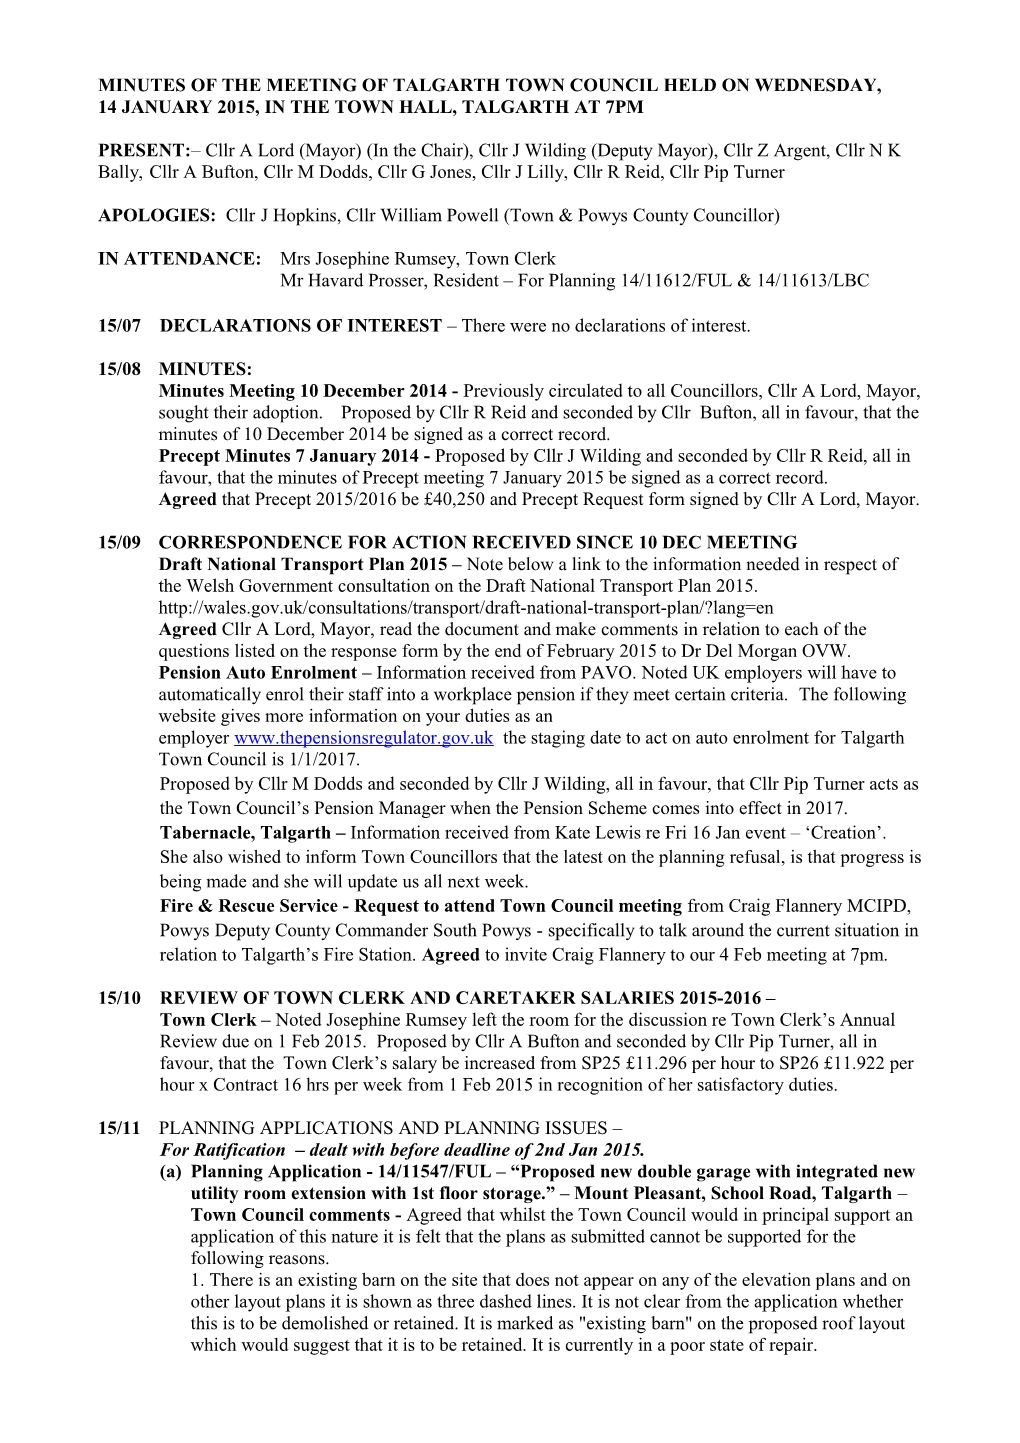 Minutes of the Meeting of Talgarth Town Council Held on Wednesday, 10 October 2012, In s4